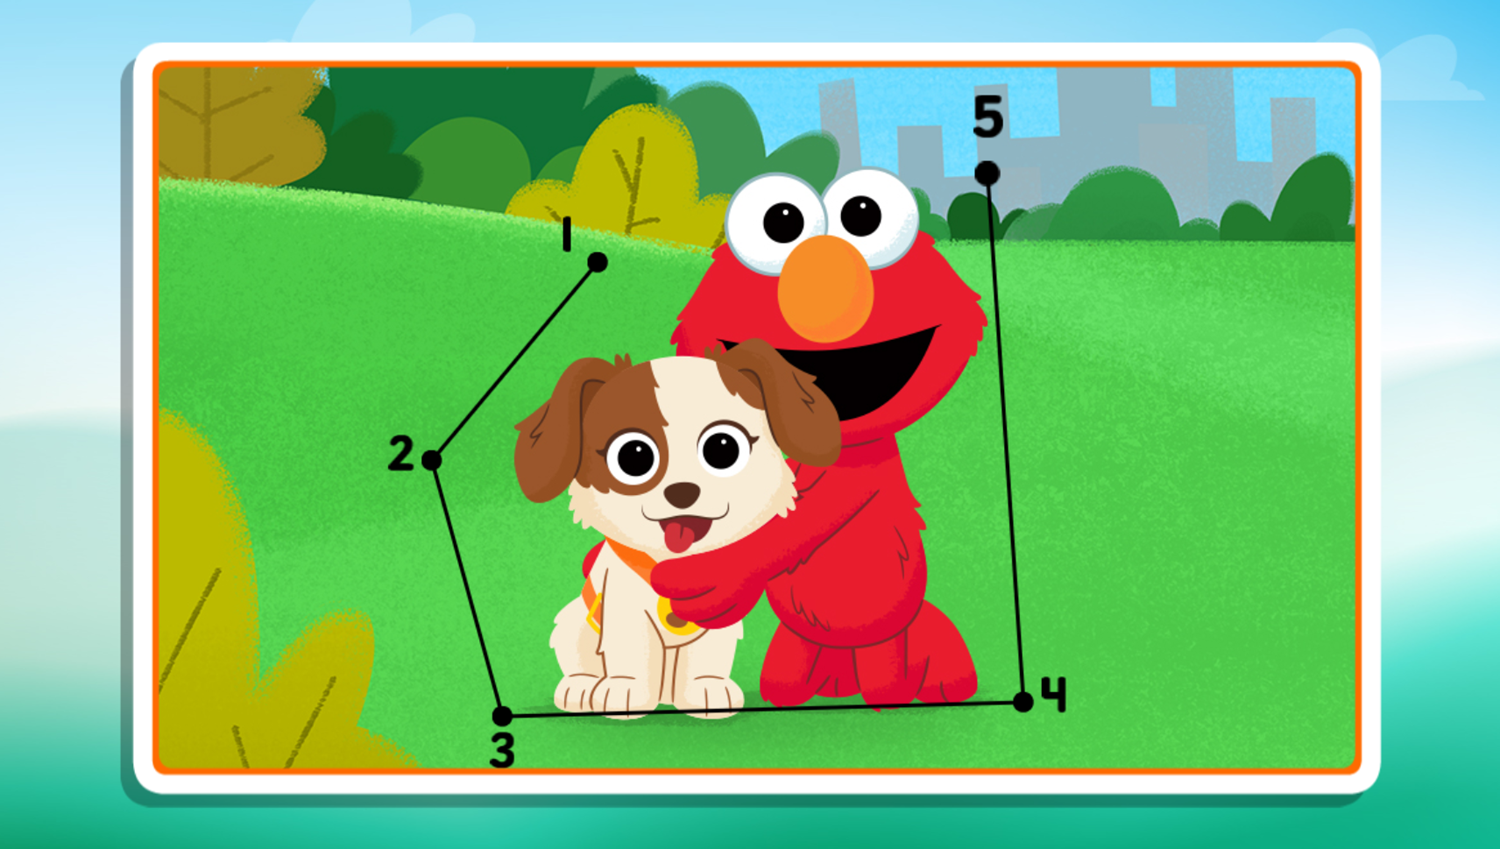 Sesame Street Furry Friends Forever Connect the Dots Game Level Complete Screenshot.